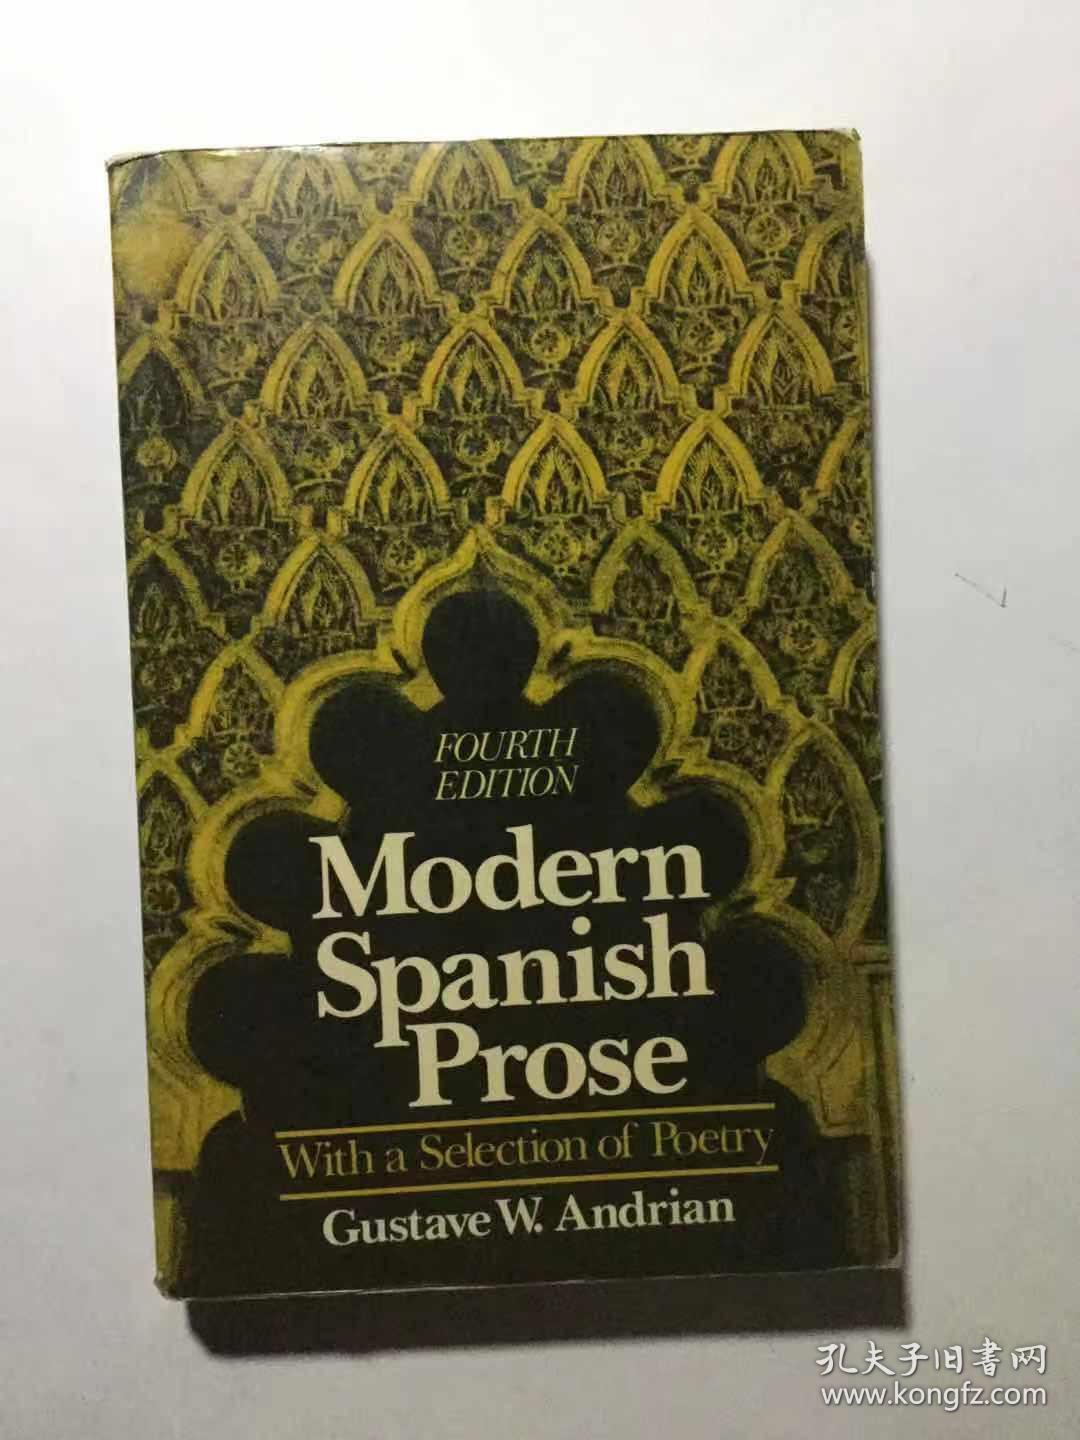 Modern Spanish Prose: With a Selection of Poetry